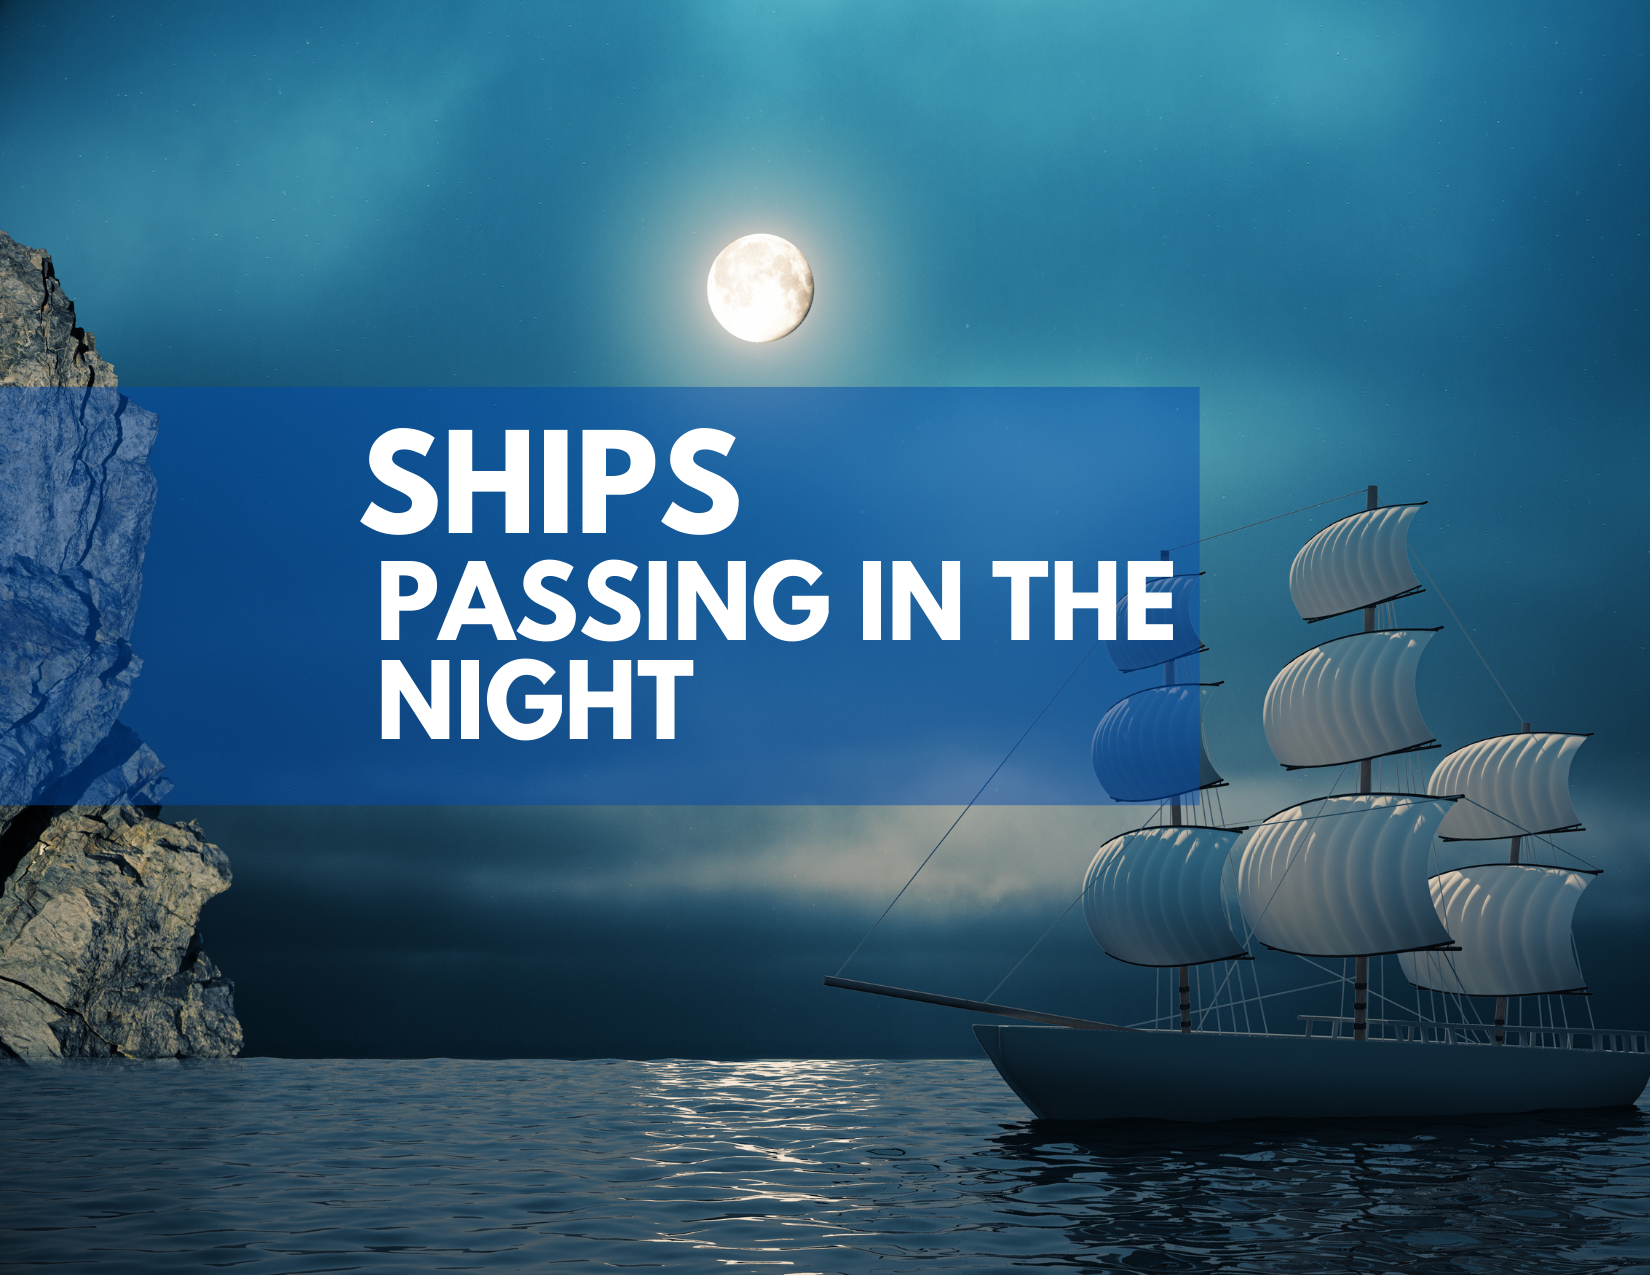 A picture of a ship in the night with the caption "ships passing in the night"